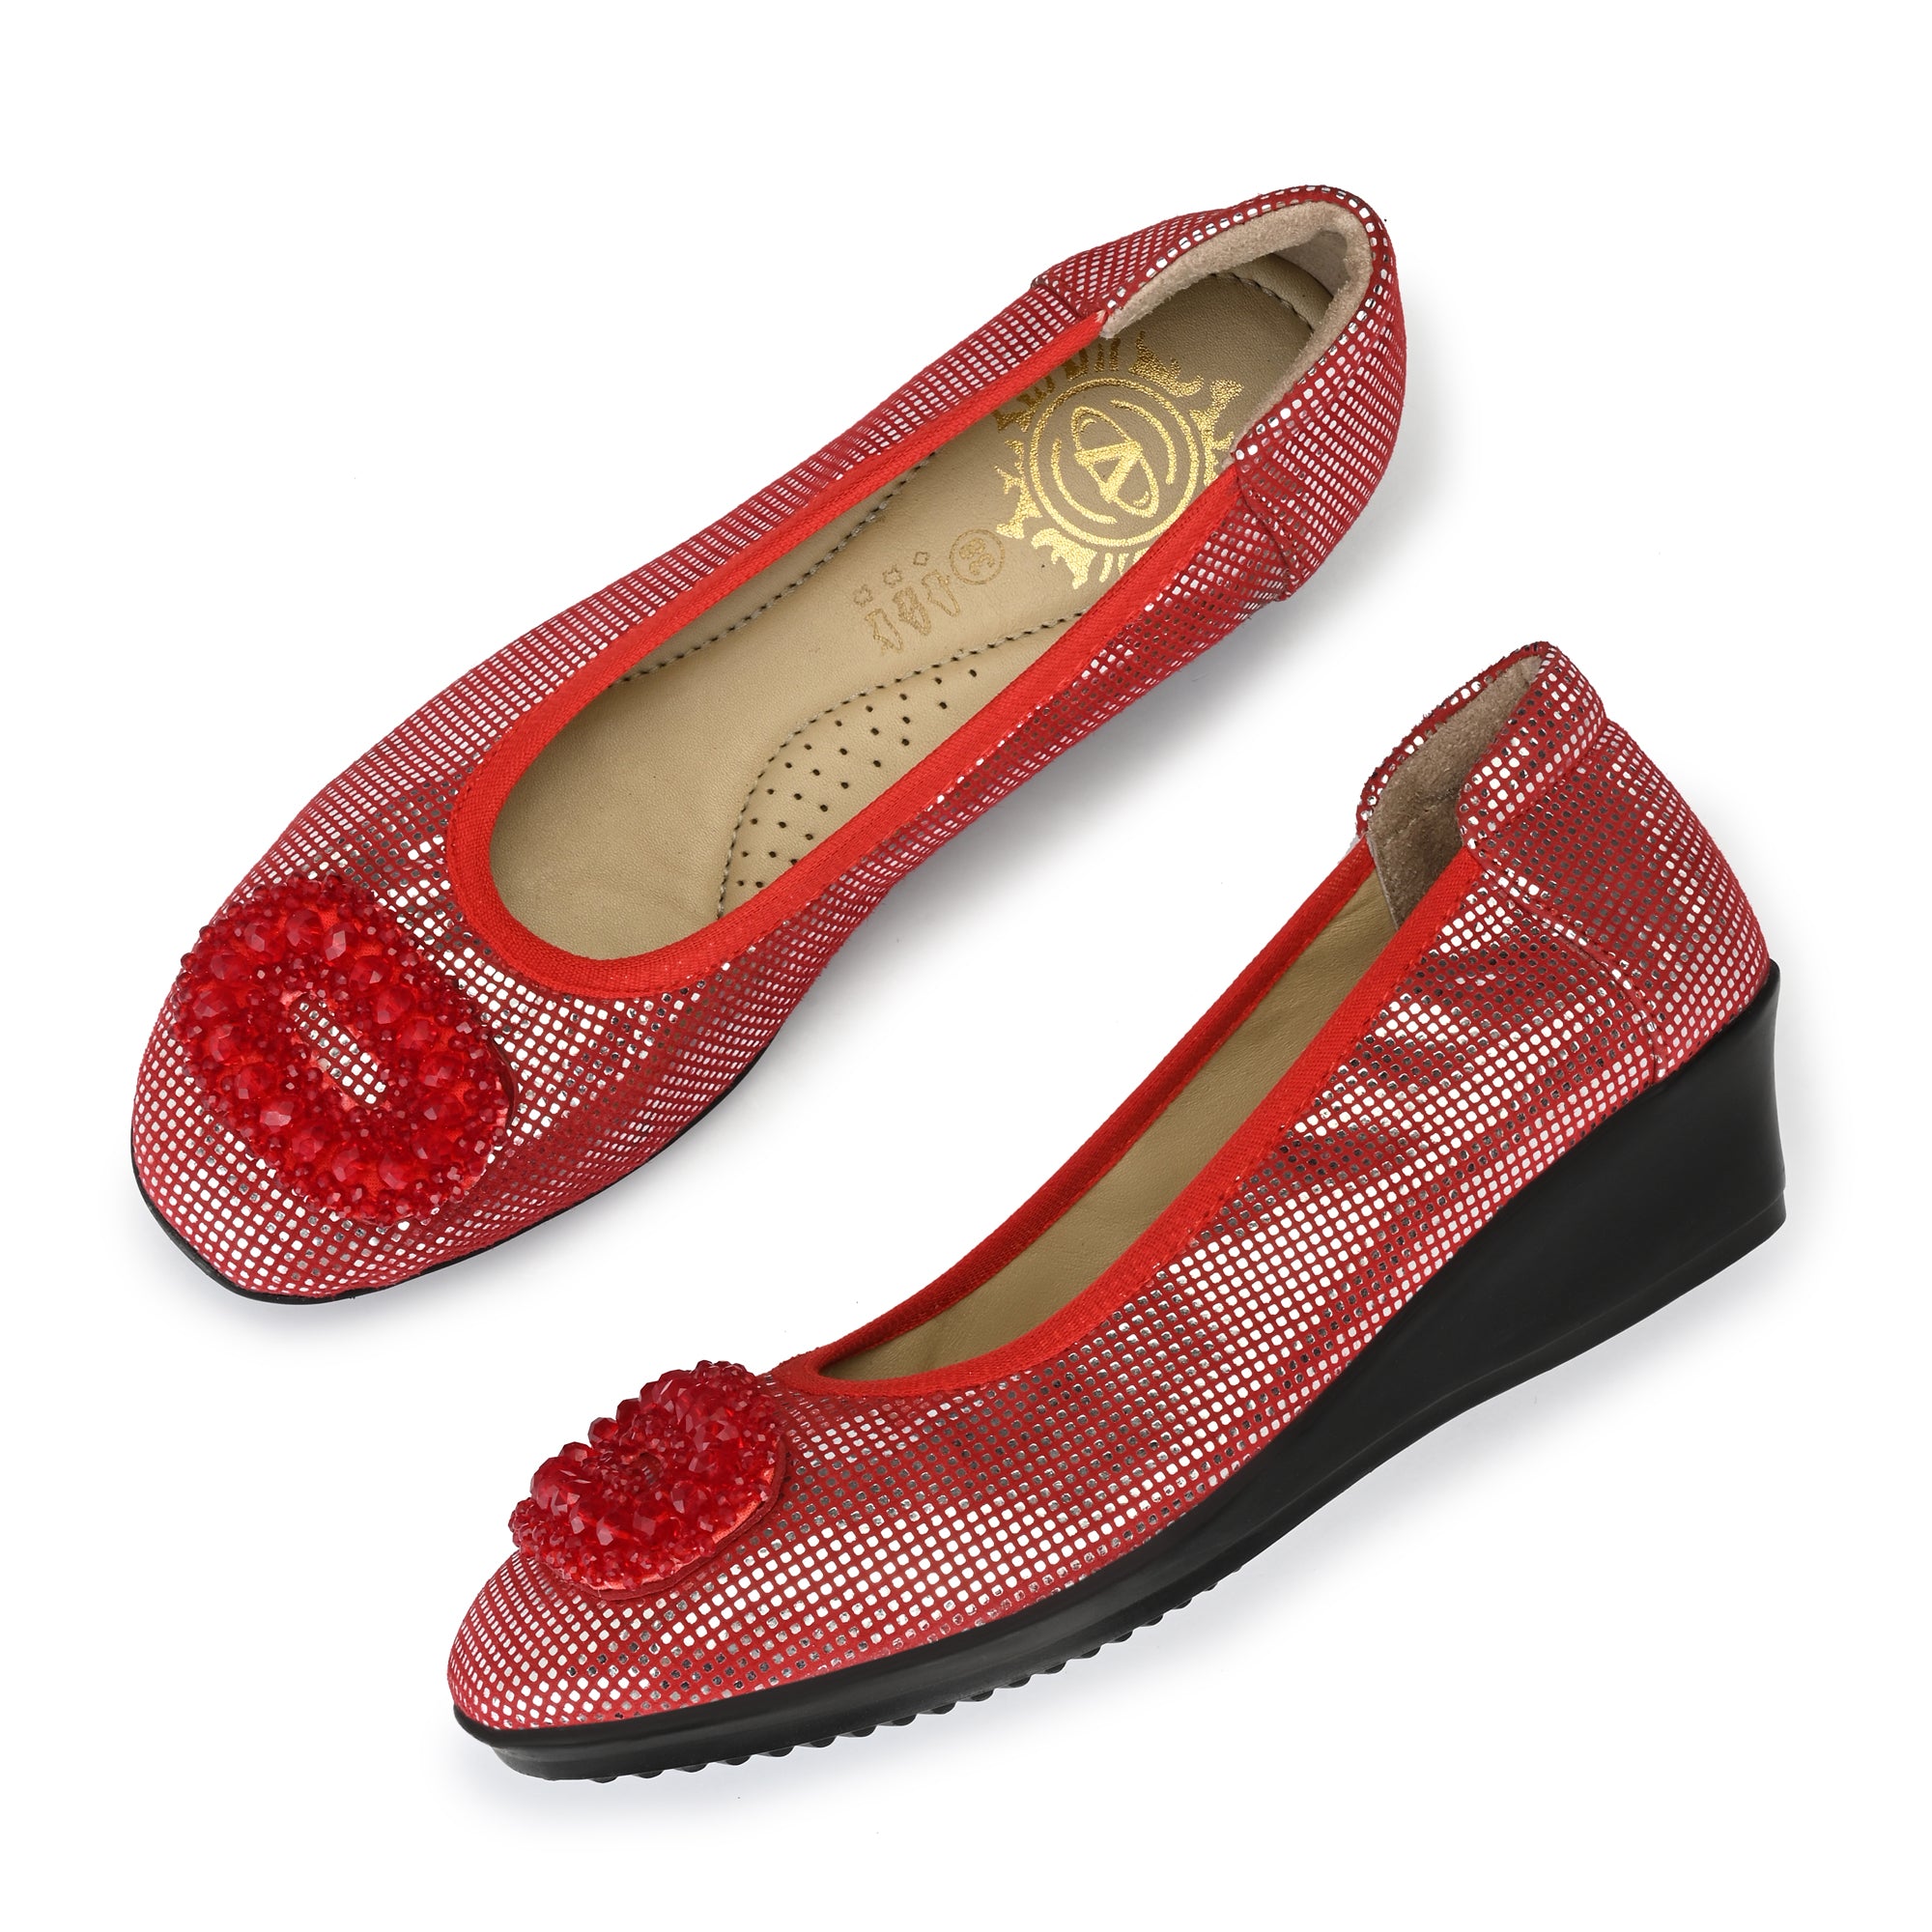 W-HR-AALIA-01 WOMEN LEATHER RED CASUAL PARTY SLIP ON